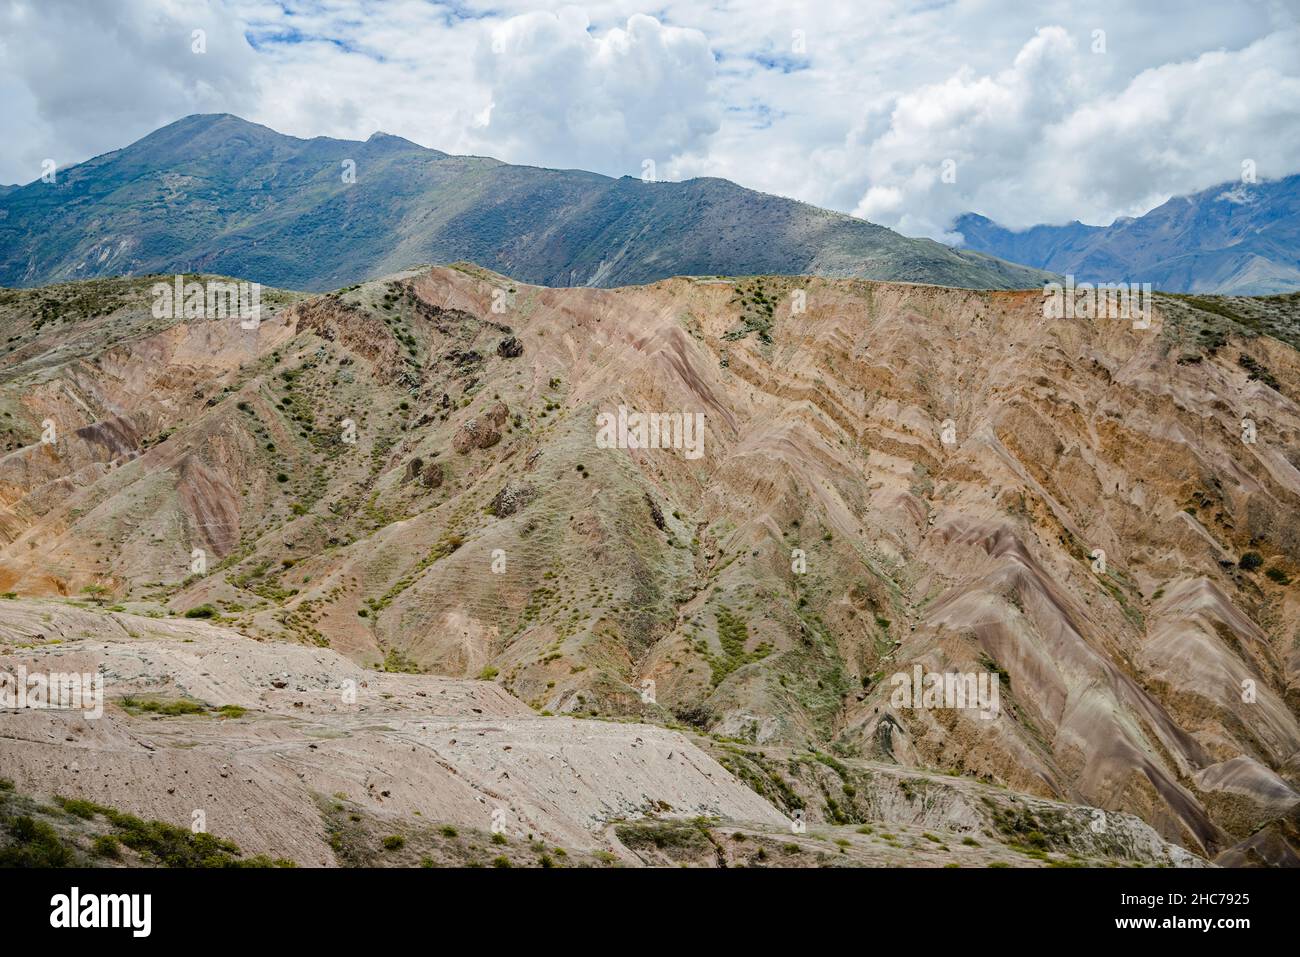 Layered sedimentary rock formations in the arid high andes Mountains. Sumaypamba, Ecuador, South America. Stock Photo